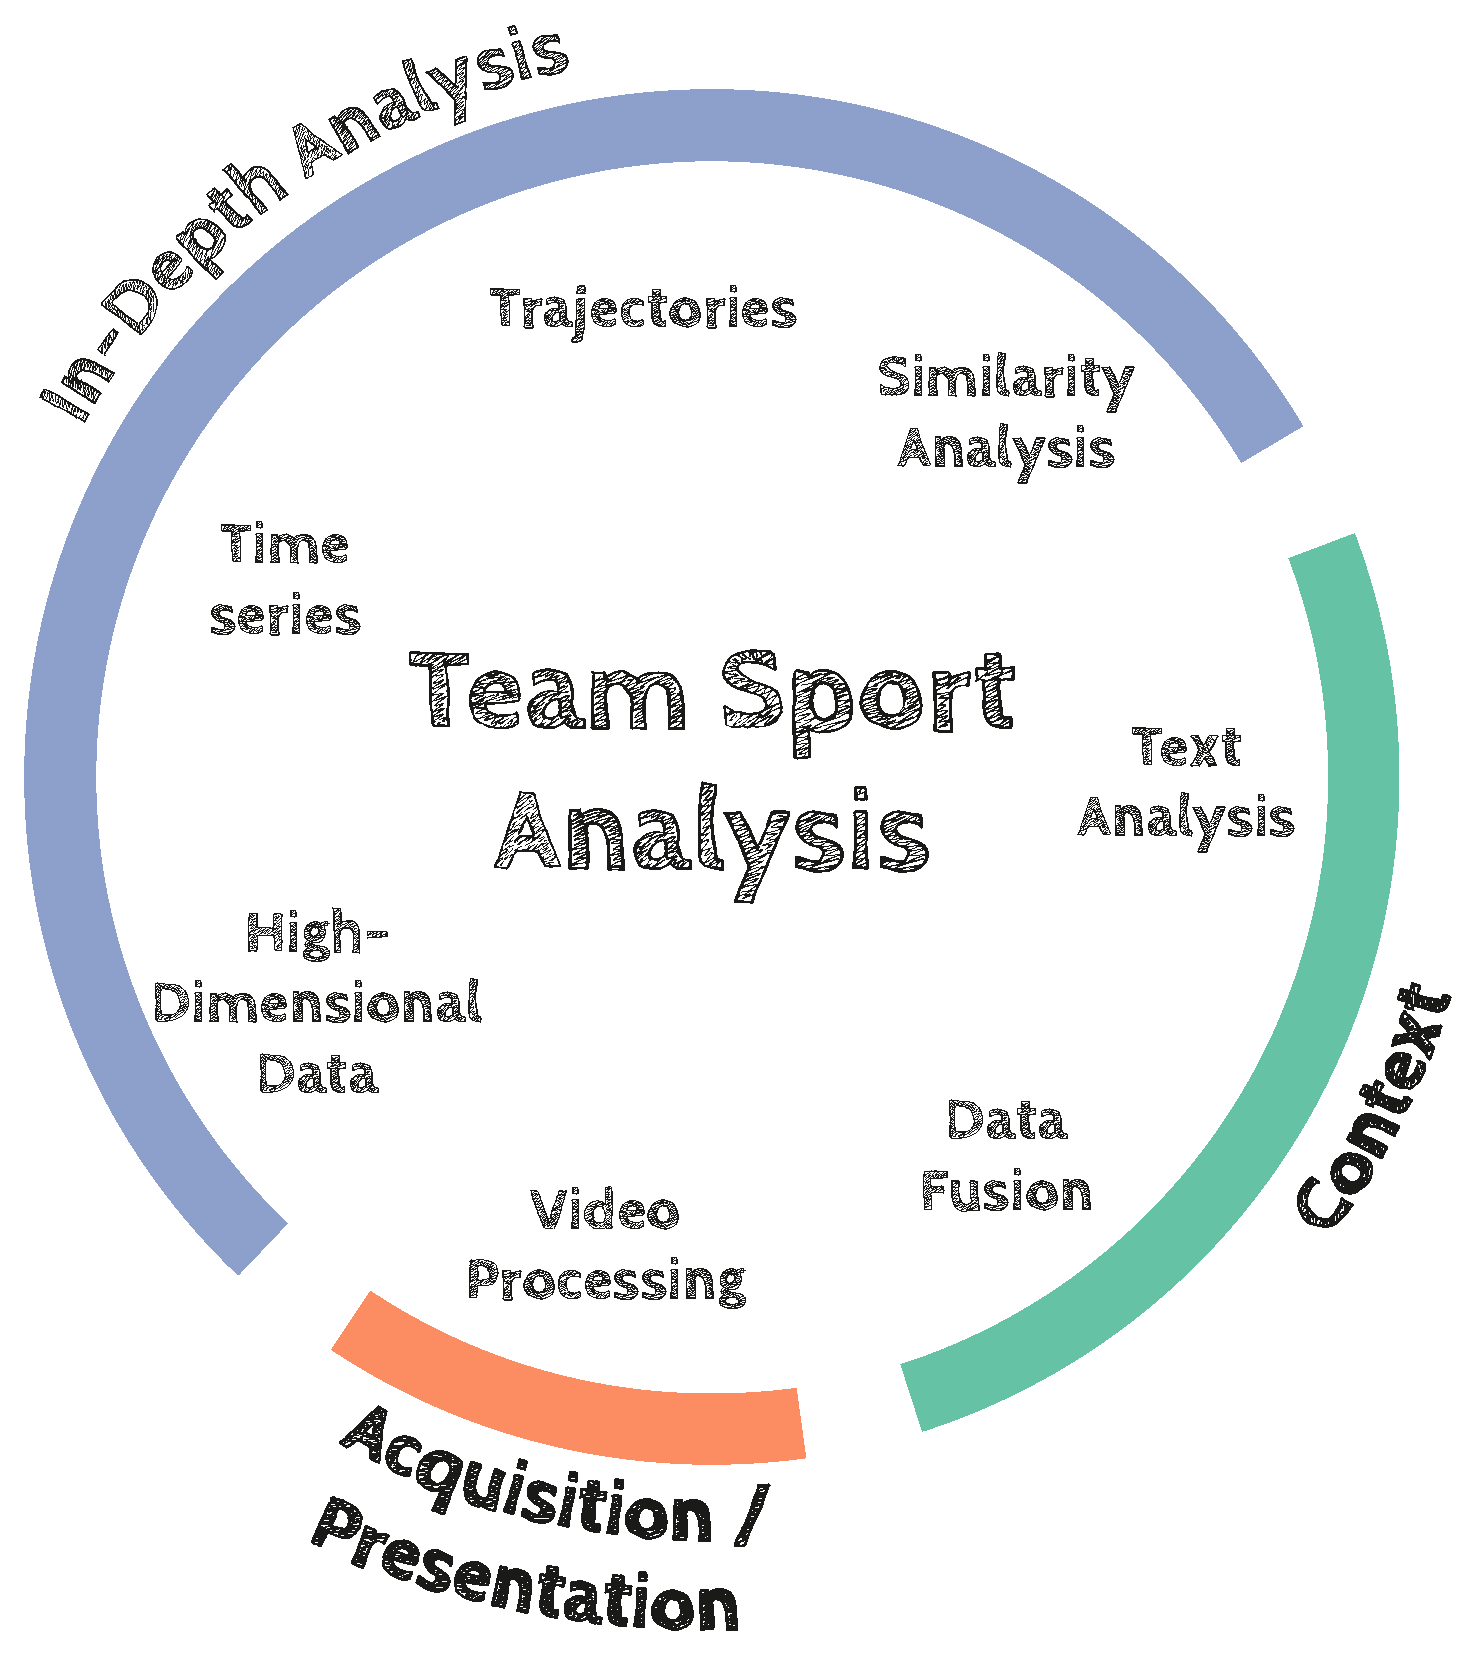 Is SoccerStats the Best Tool for Football Analysis? Answered